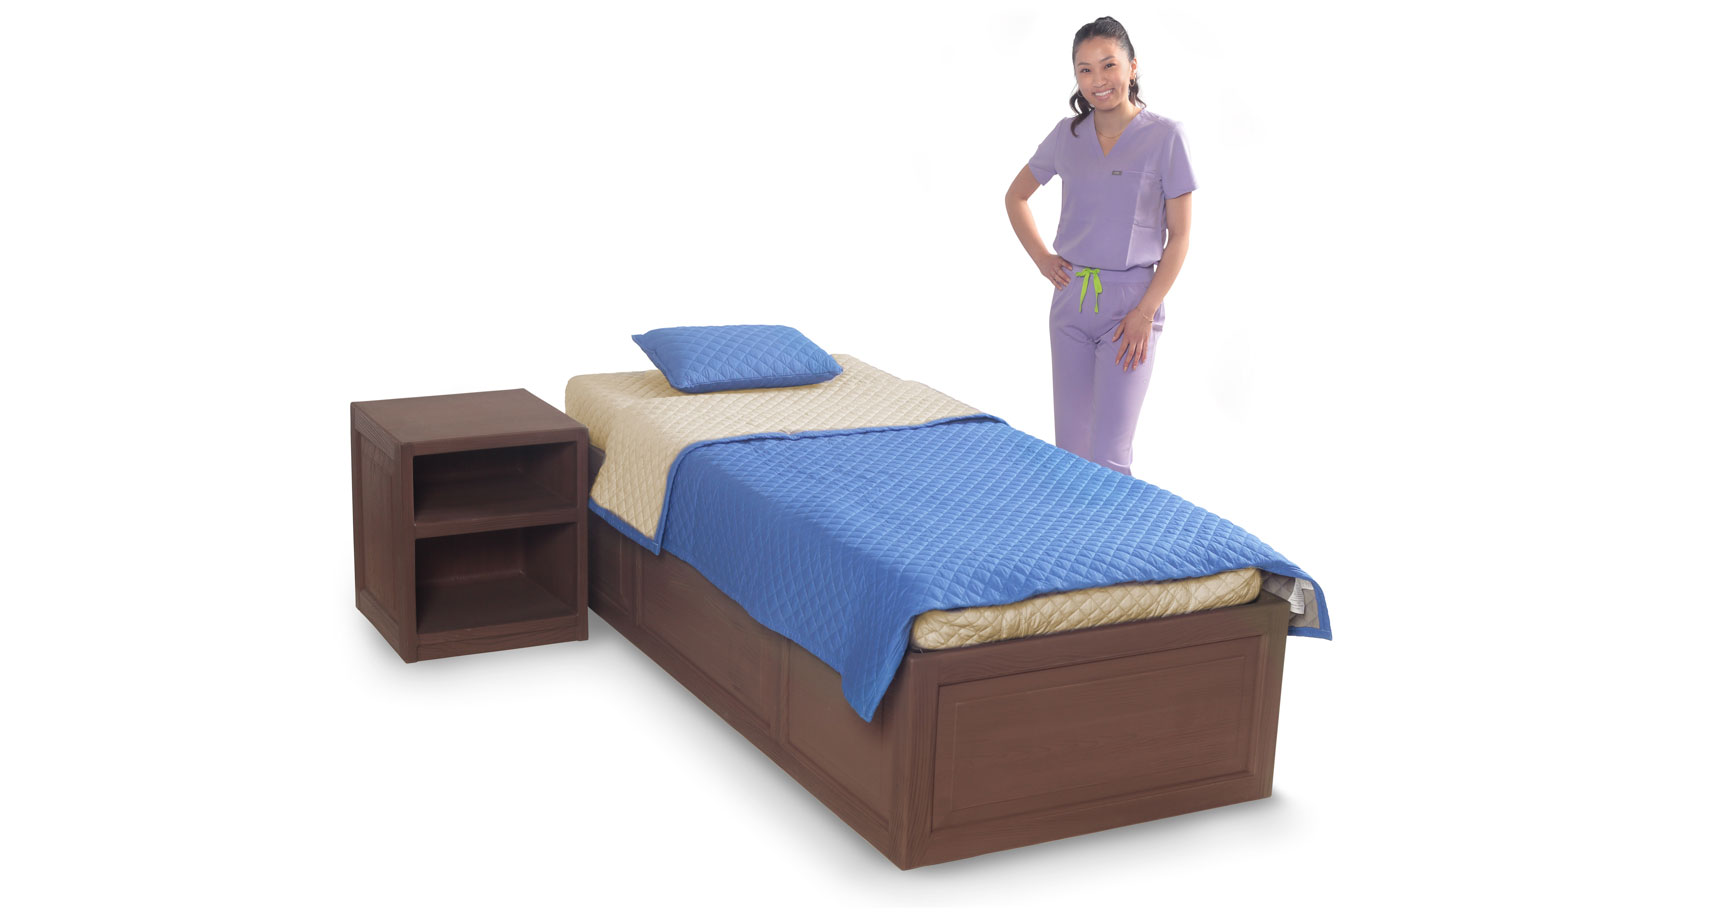 Girl standing next to bed, featuring safety bedding in Navy blue color